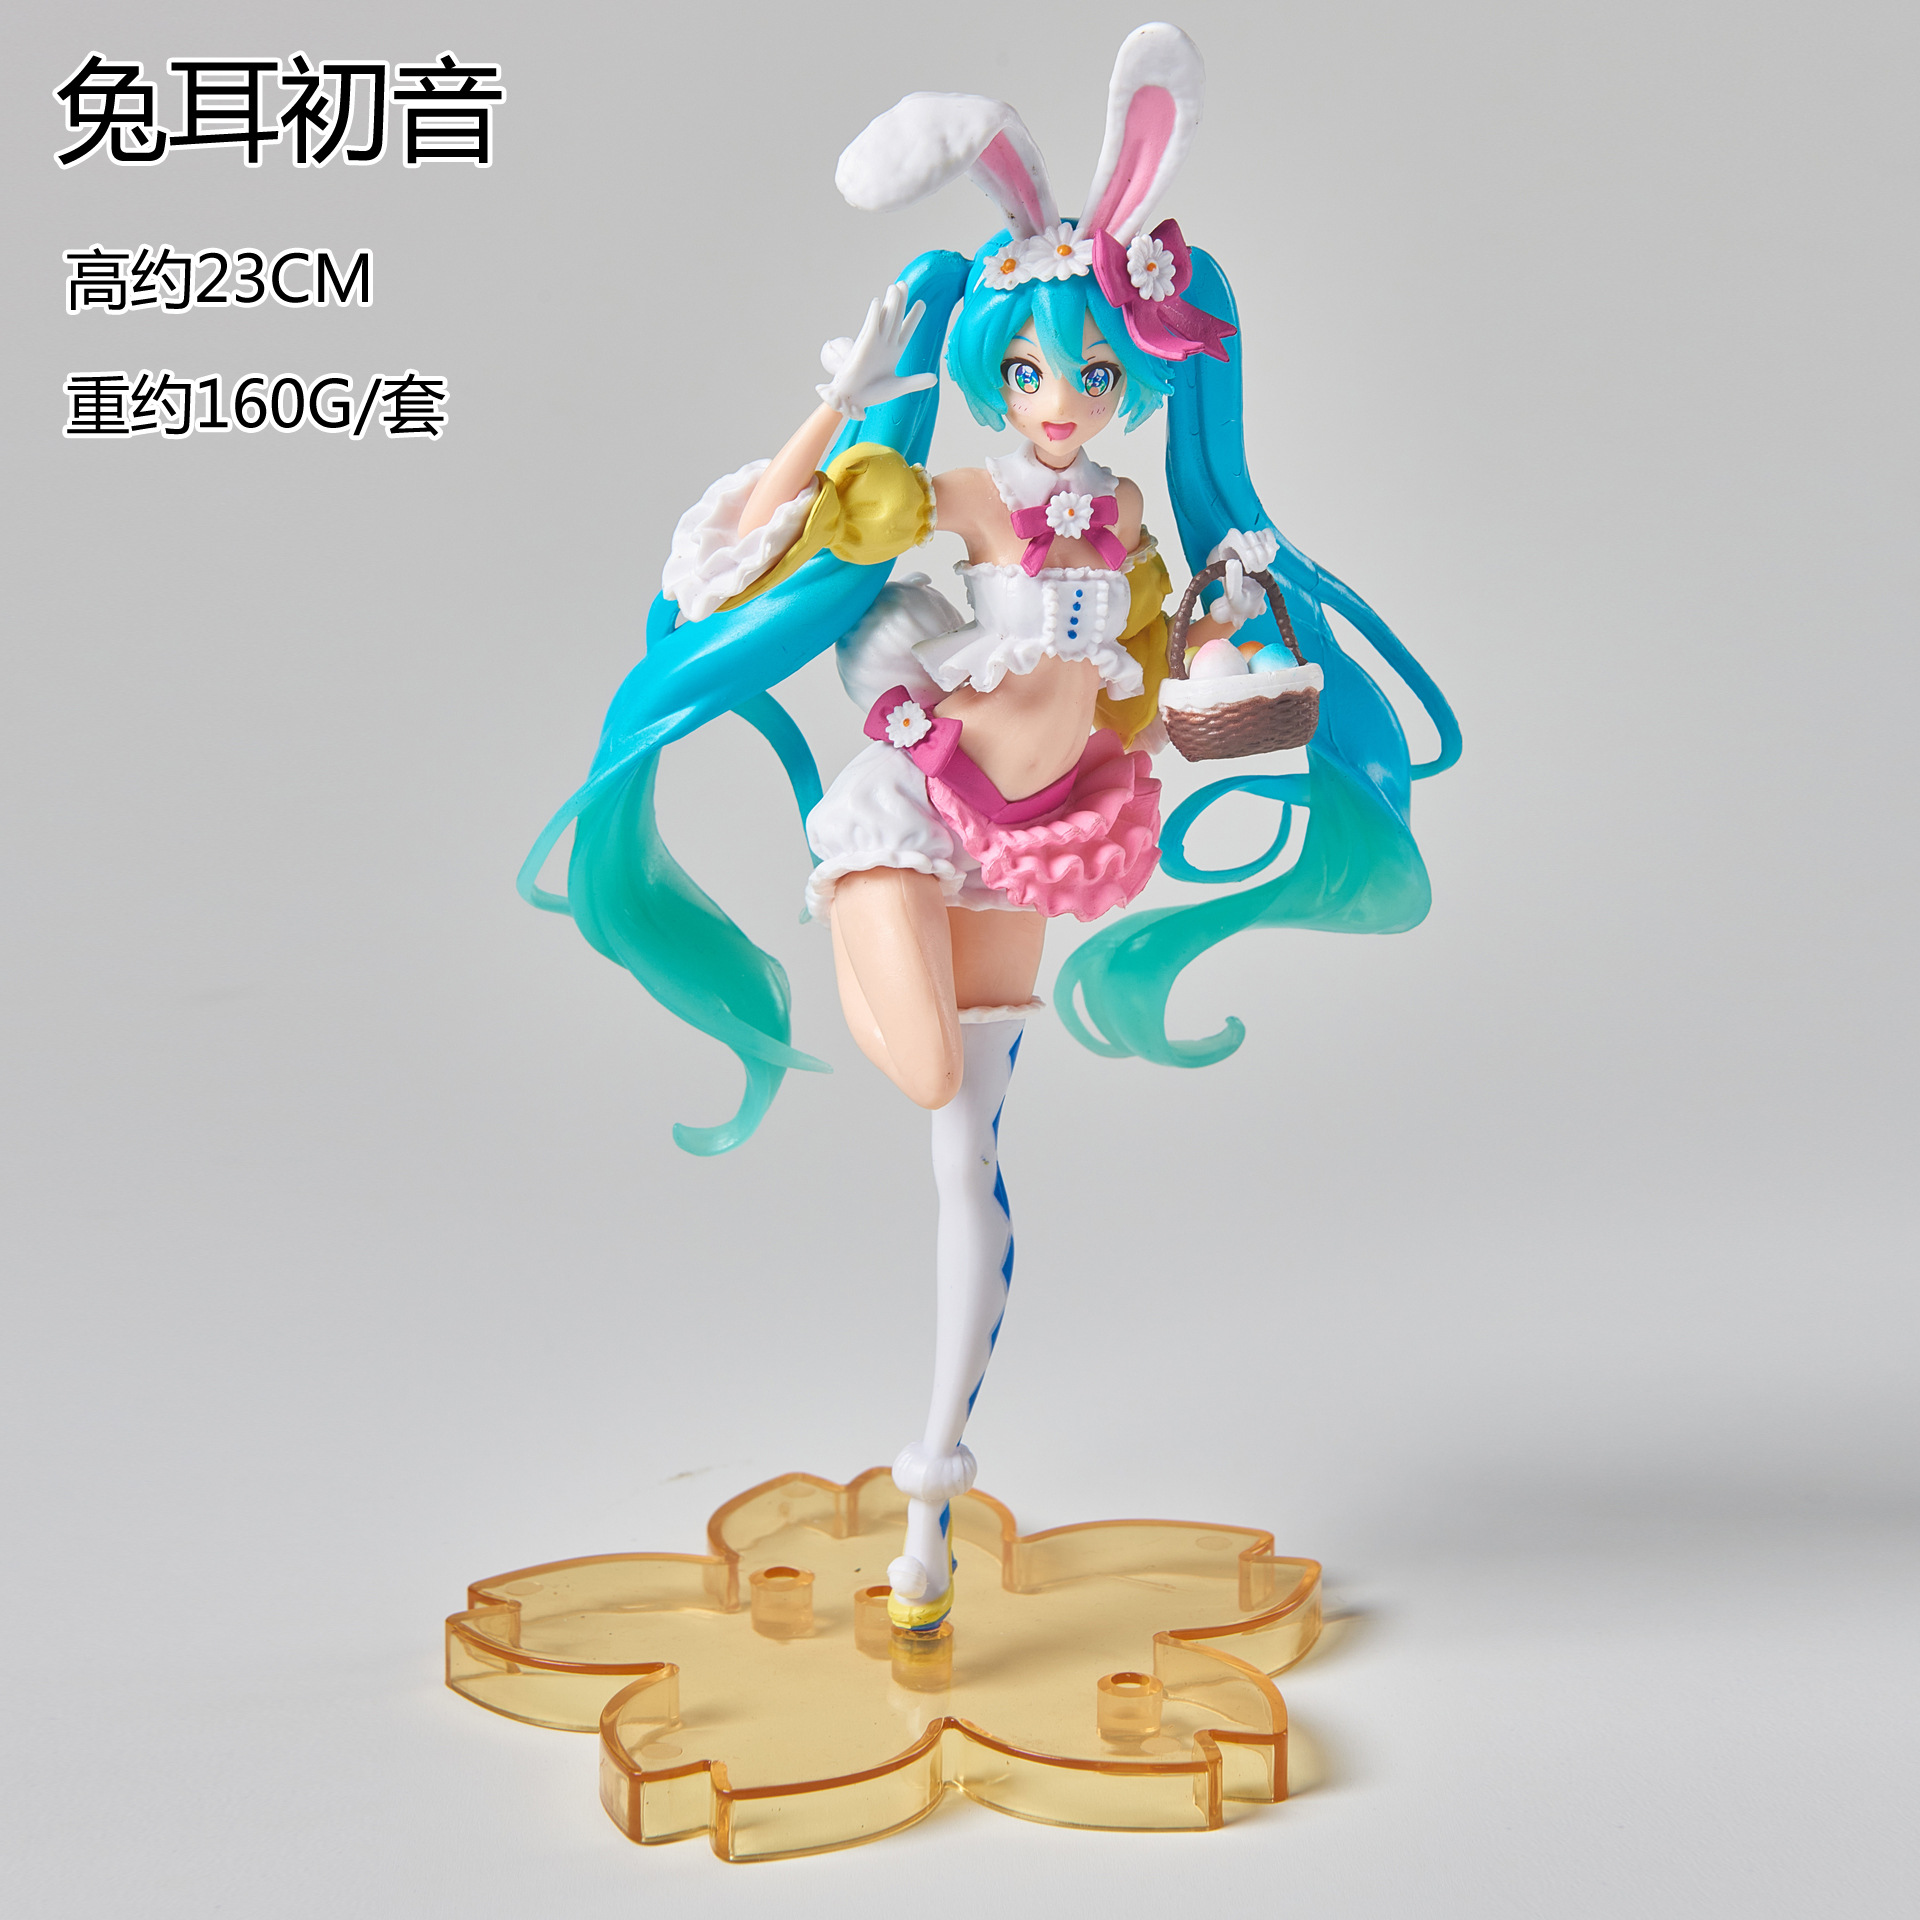 Hatsune Miku Hand-Made Spring Clothes Rabbit Ears Hatsune Doll Toy Cute Ornaments Decorative Anime Peripheral